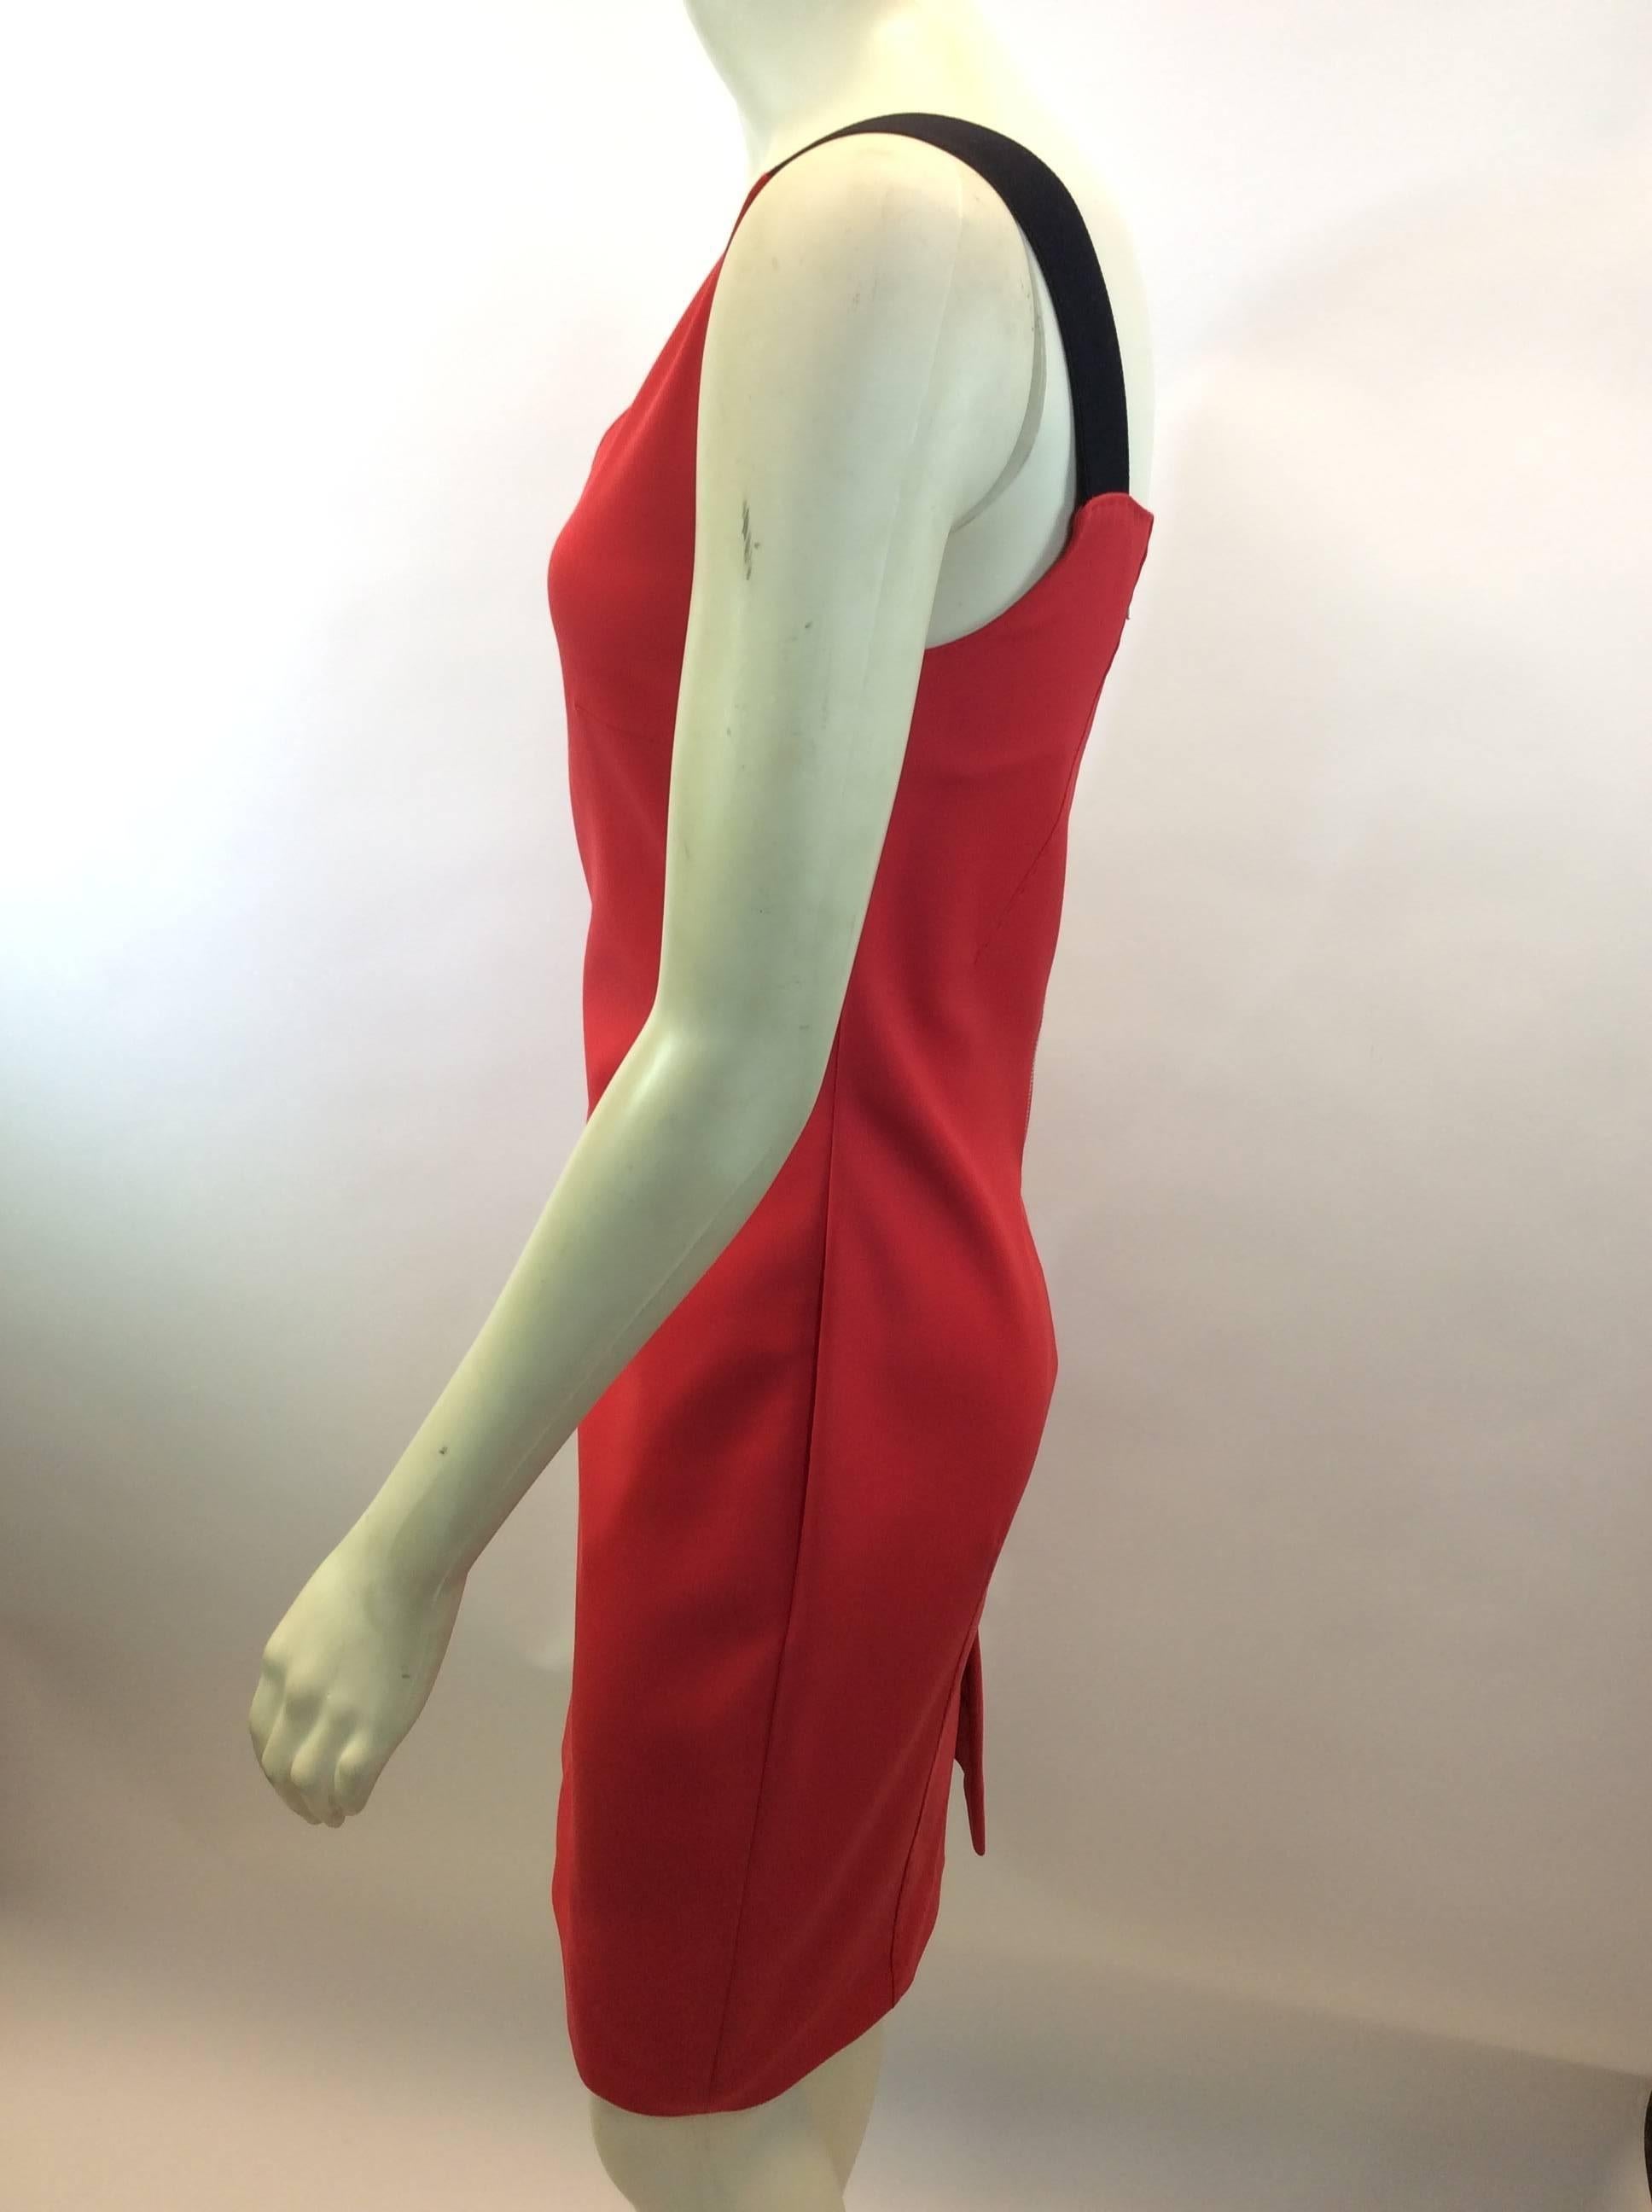 Les Copains Red Dress
$225
Made in Italy
50% Cotton
46% Nylon
4% Elastic
Size 40
Length 34